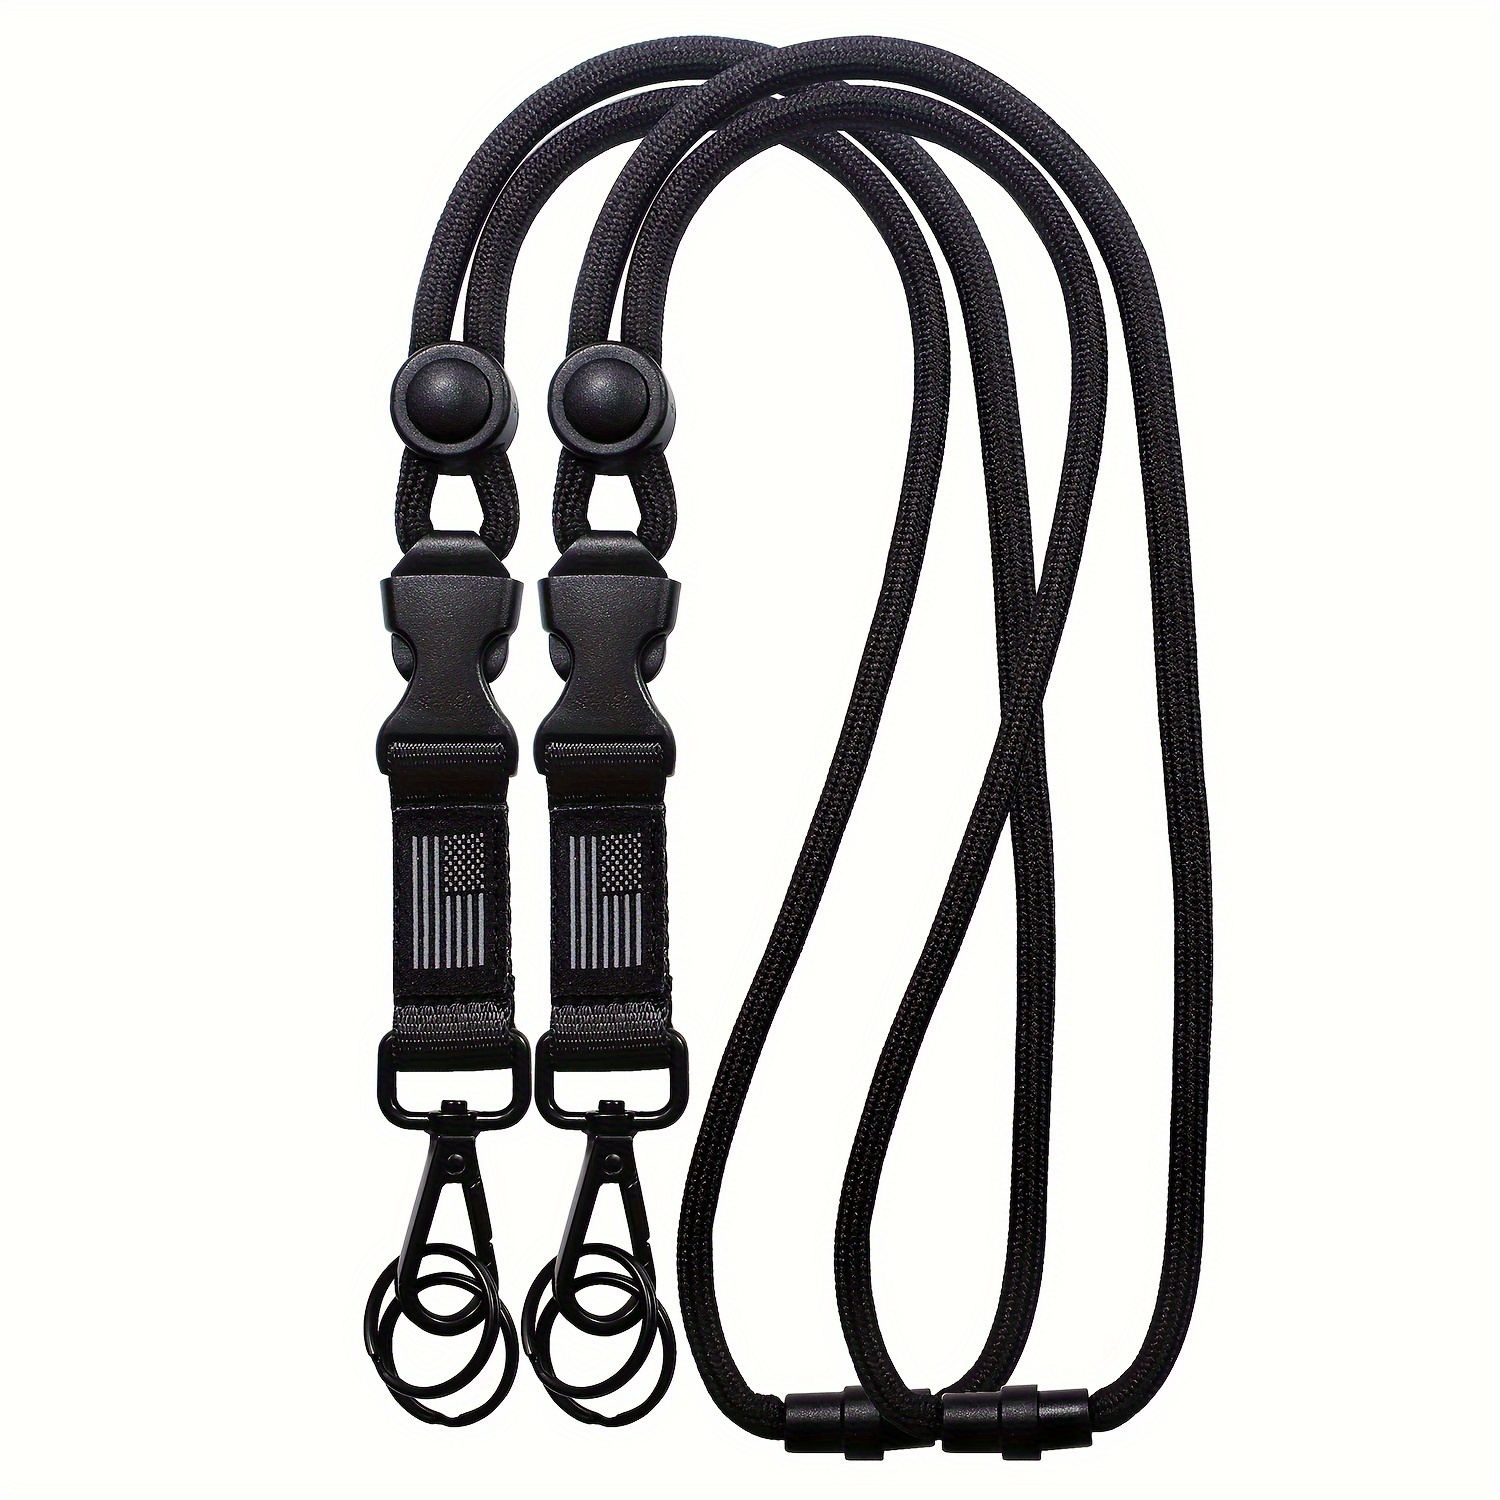 Rounded Paracord ID Lanyard with Breakaway Clasp and Black or Silver Metal Carabiner (Free Badge Holder Included) | 105 Colors to Choose from Black